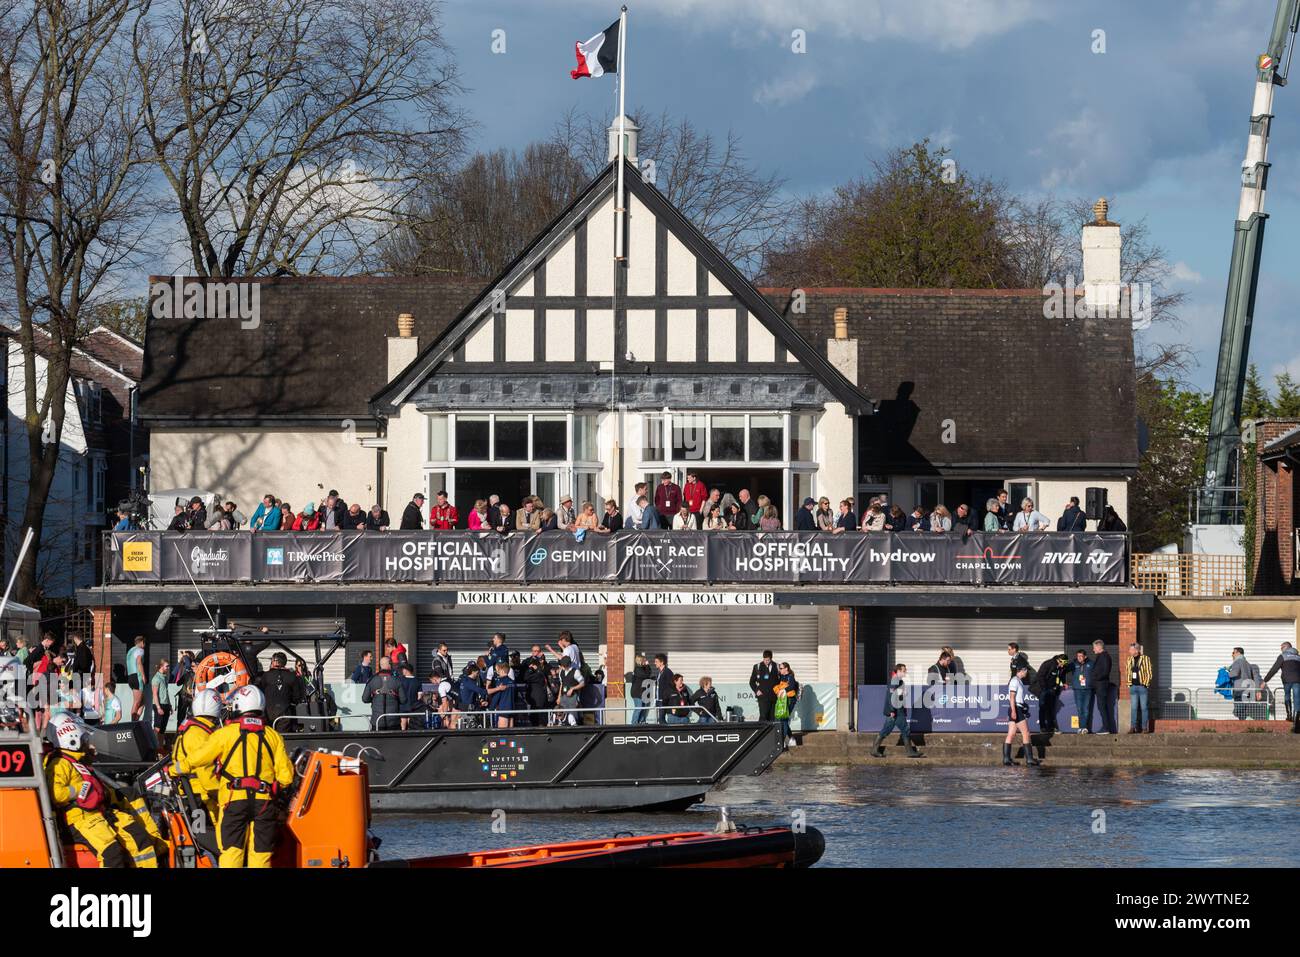 Mortlake Anglian & Alpha Boat Club at the finish of the University Boat Race event on the River Thames, London, UK. Rowers, supporters and chase boats Stock Photo